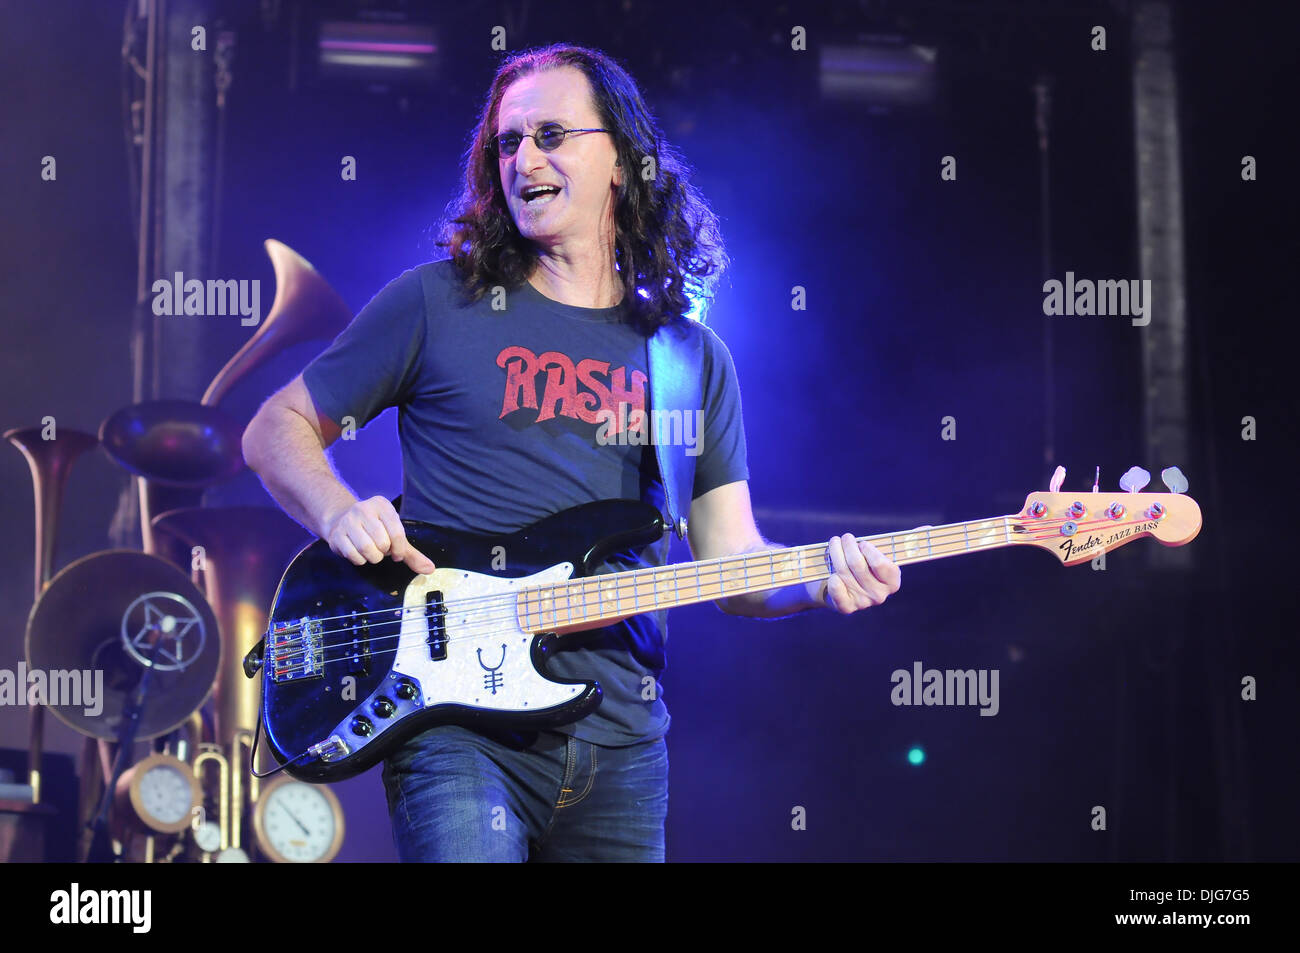 July 13, 2010 - Toronto, Ontario, Canada - 13 July 2010 Toronto, Ontario: Bassist Geddy Lee of the the Canadian rock trio, Rush played to an enthusiastic, capacity hometown crowd at the Molson Canadian Amphitheatre Tuesday night in Toronto. (Credit Image: © Darren Eagles/Southcreek Global/ZUMApress.com) Stock Photo